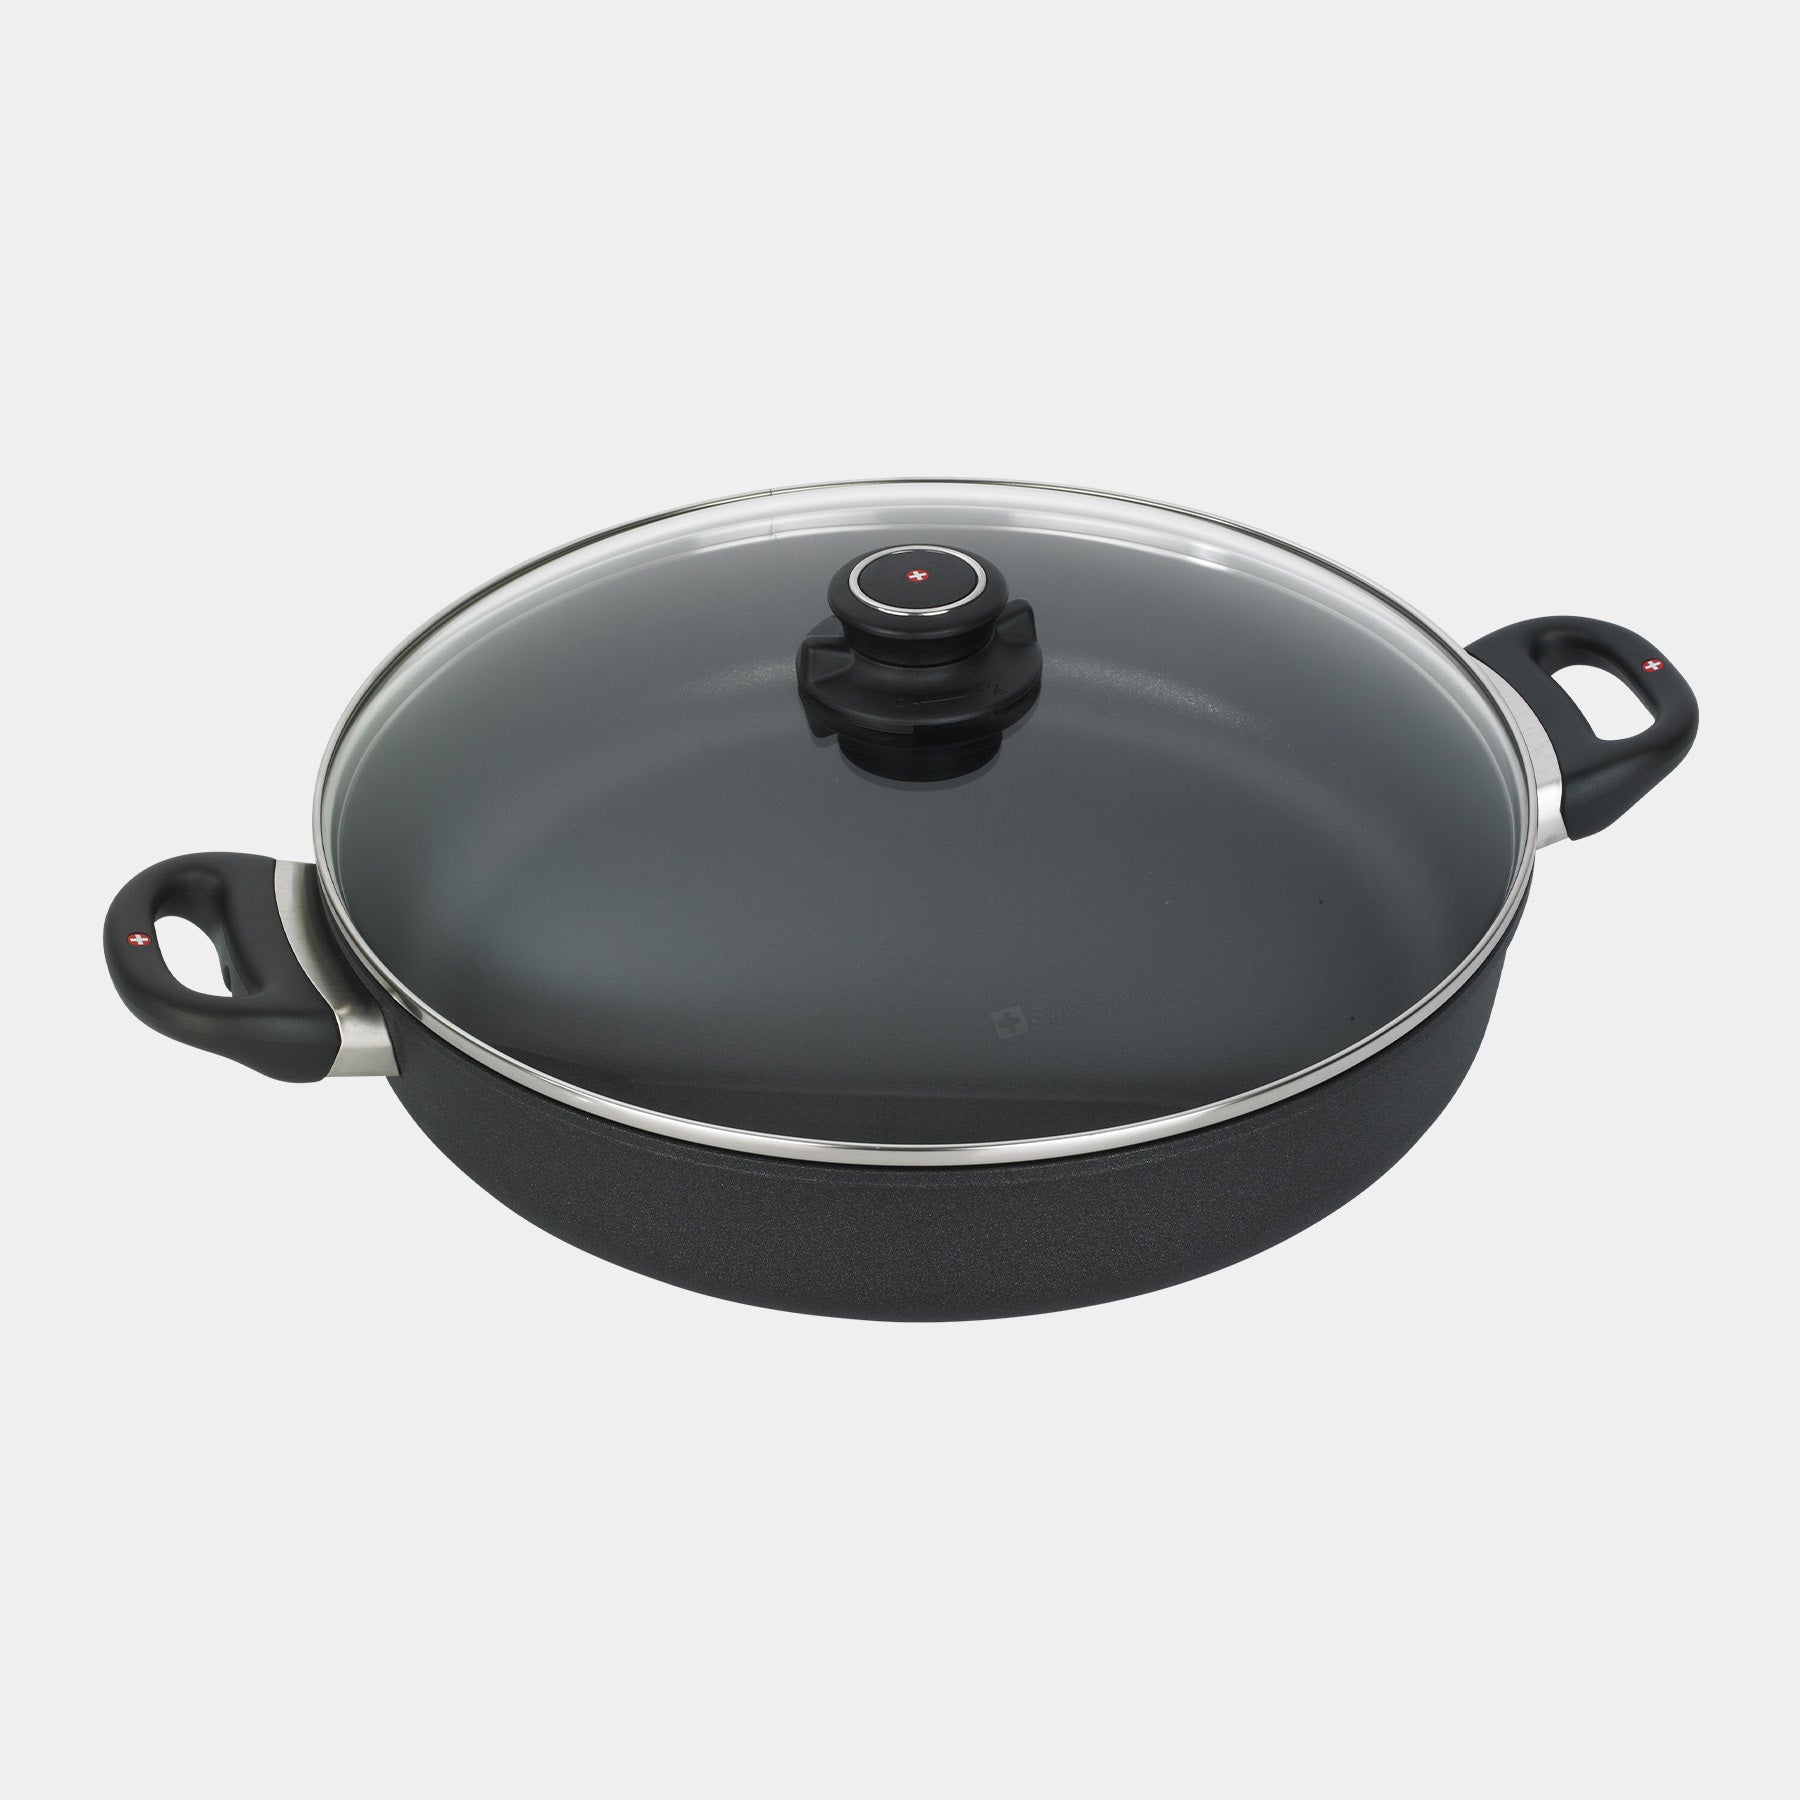 XD Nonstick 12.5" Sauteuse with Glass Lid